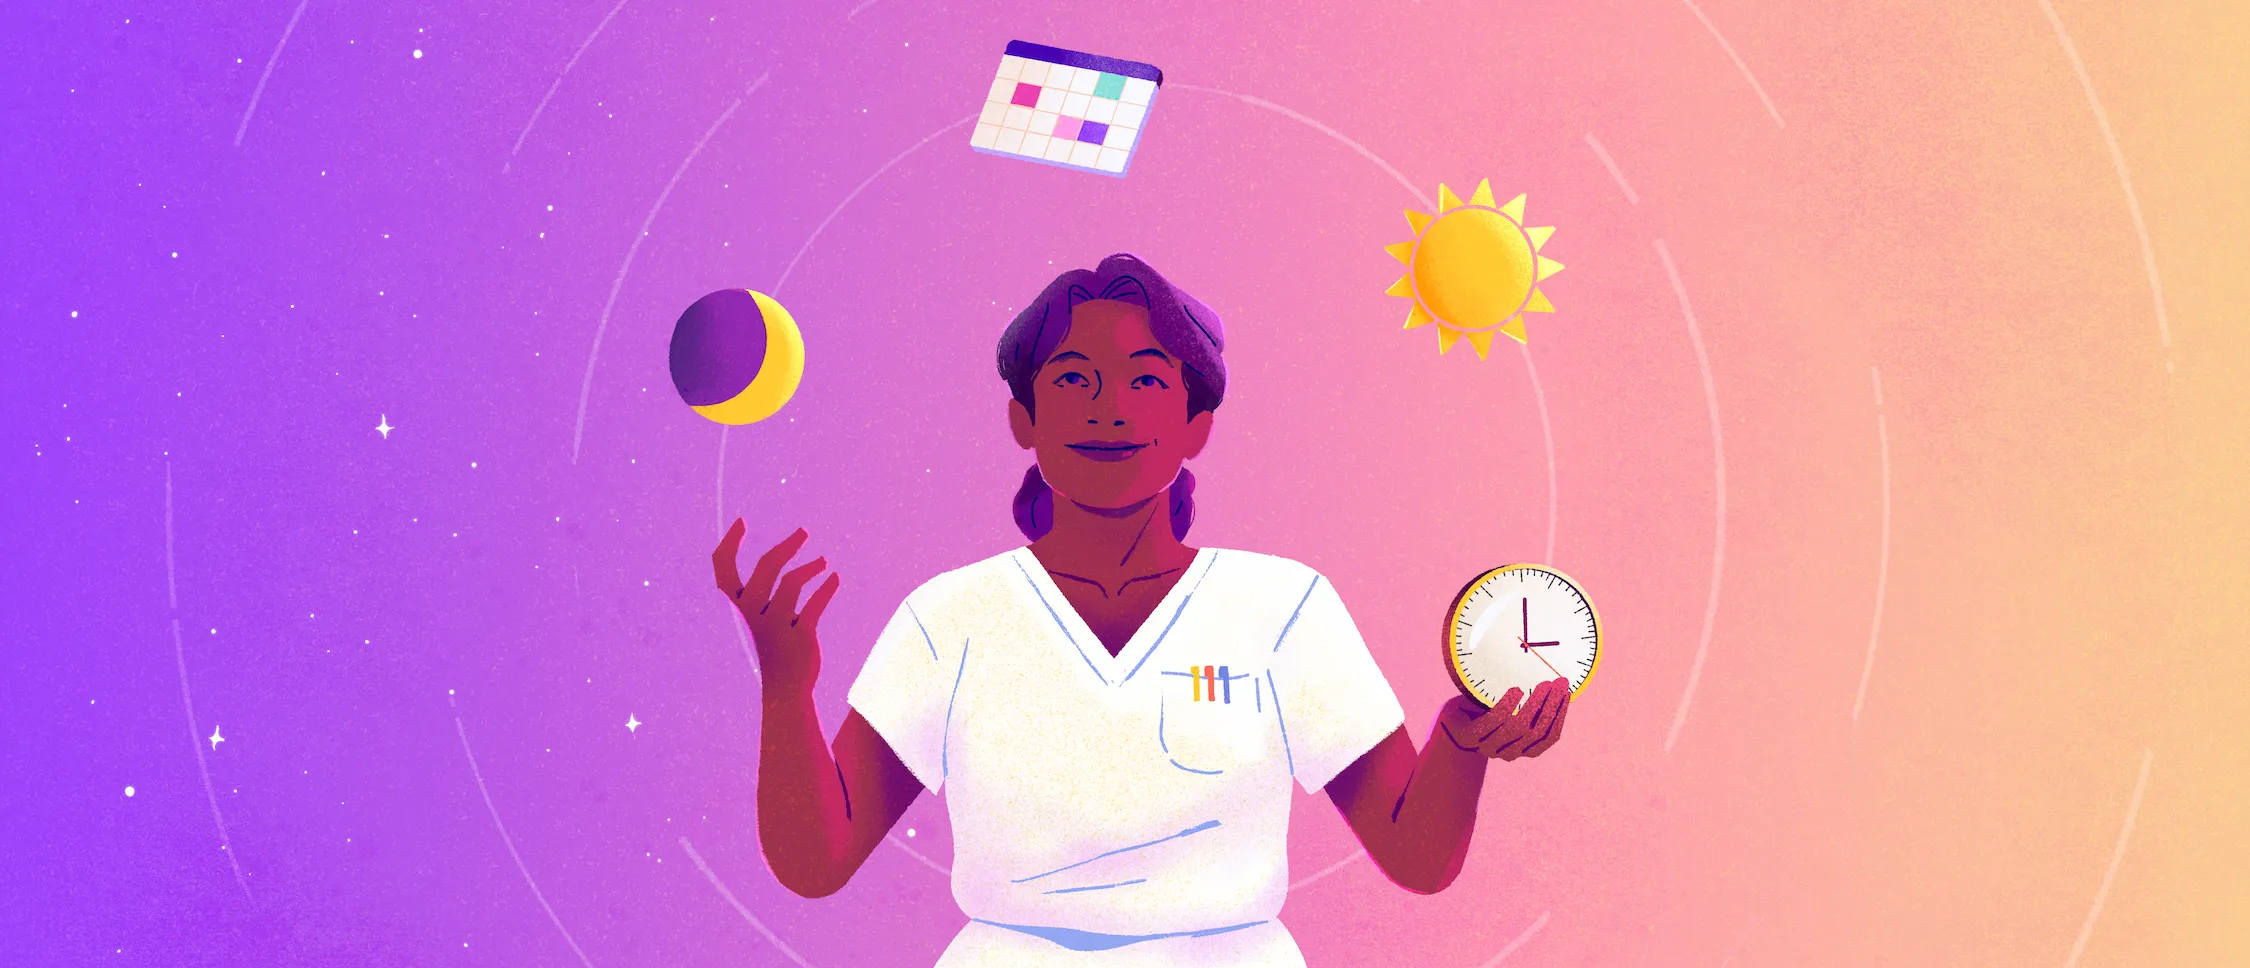 Woman nurse juggling with a moon, a sun, a clock and a schedule